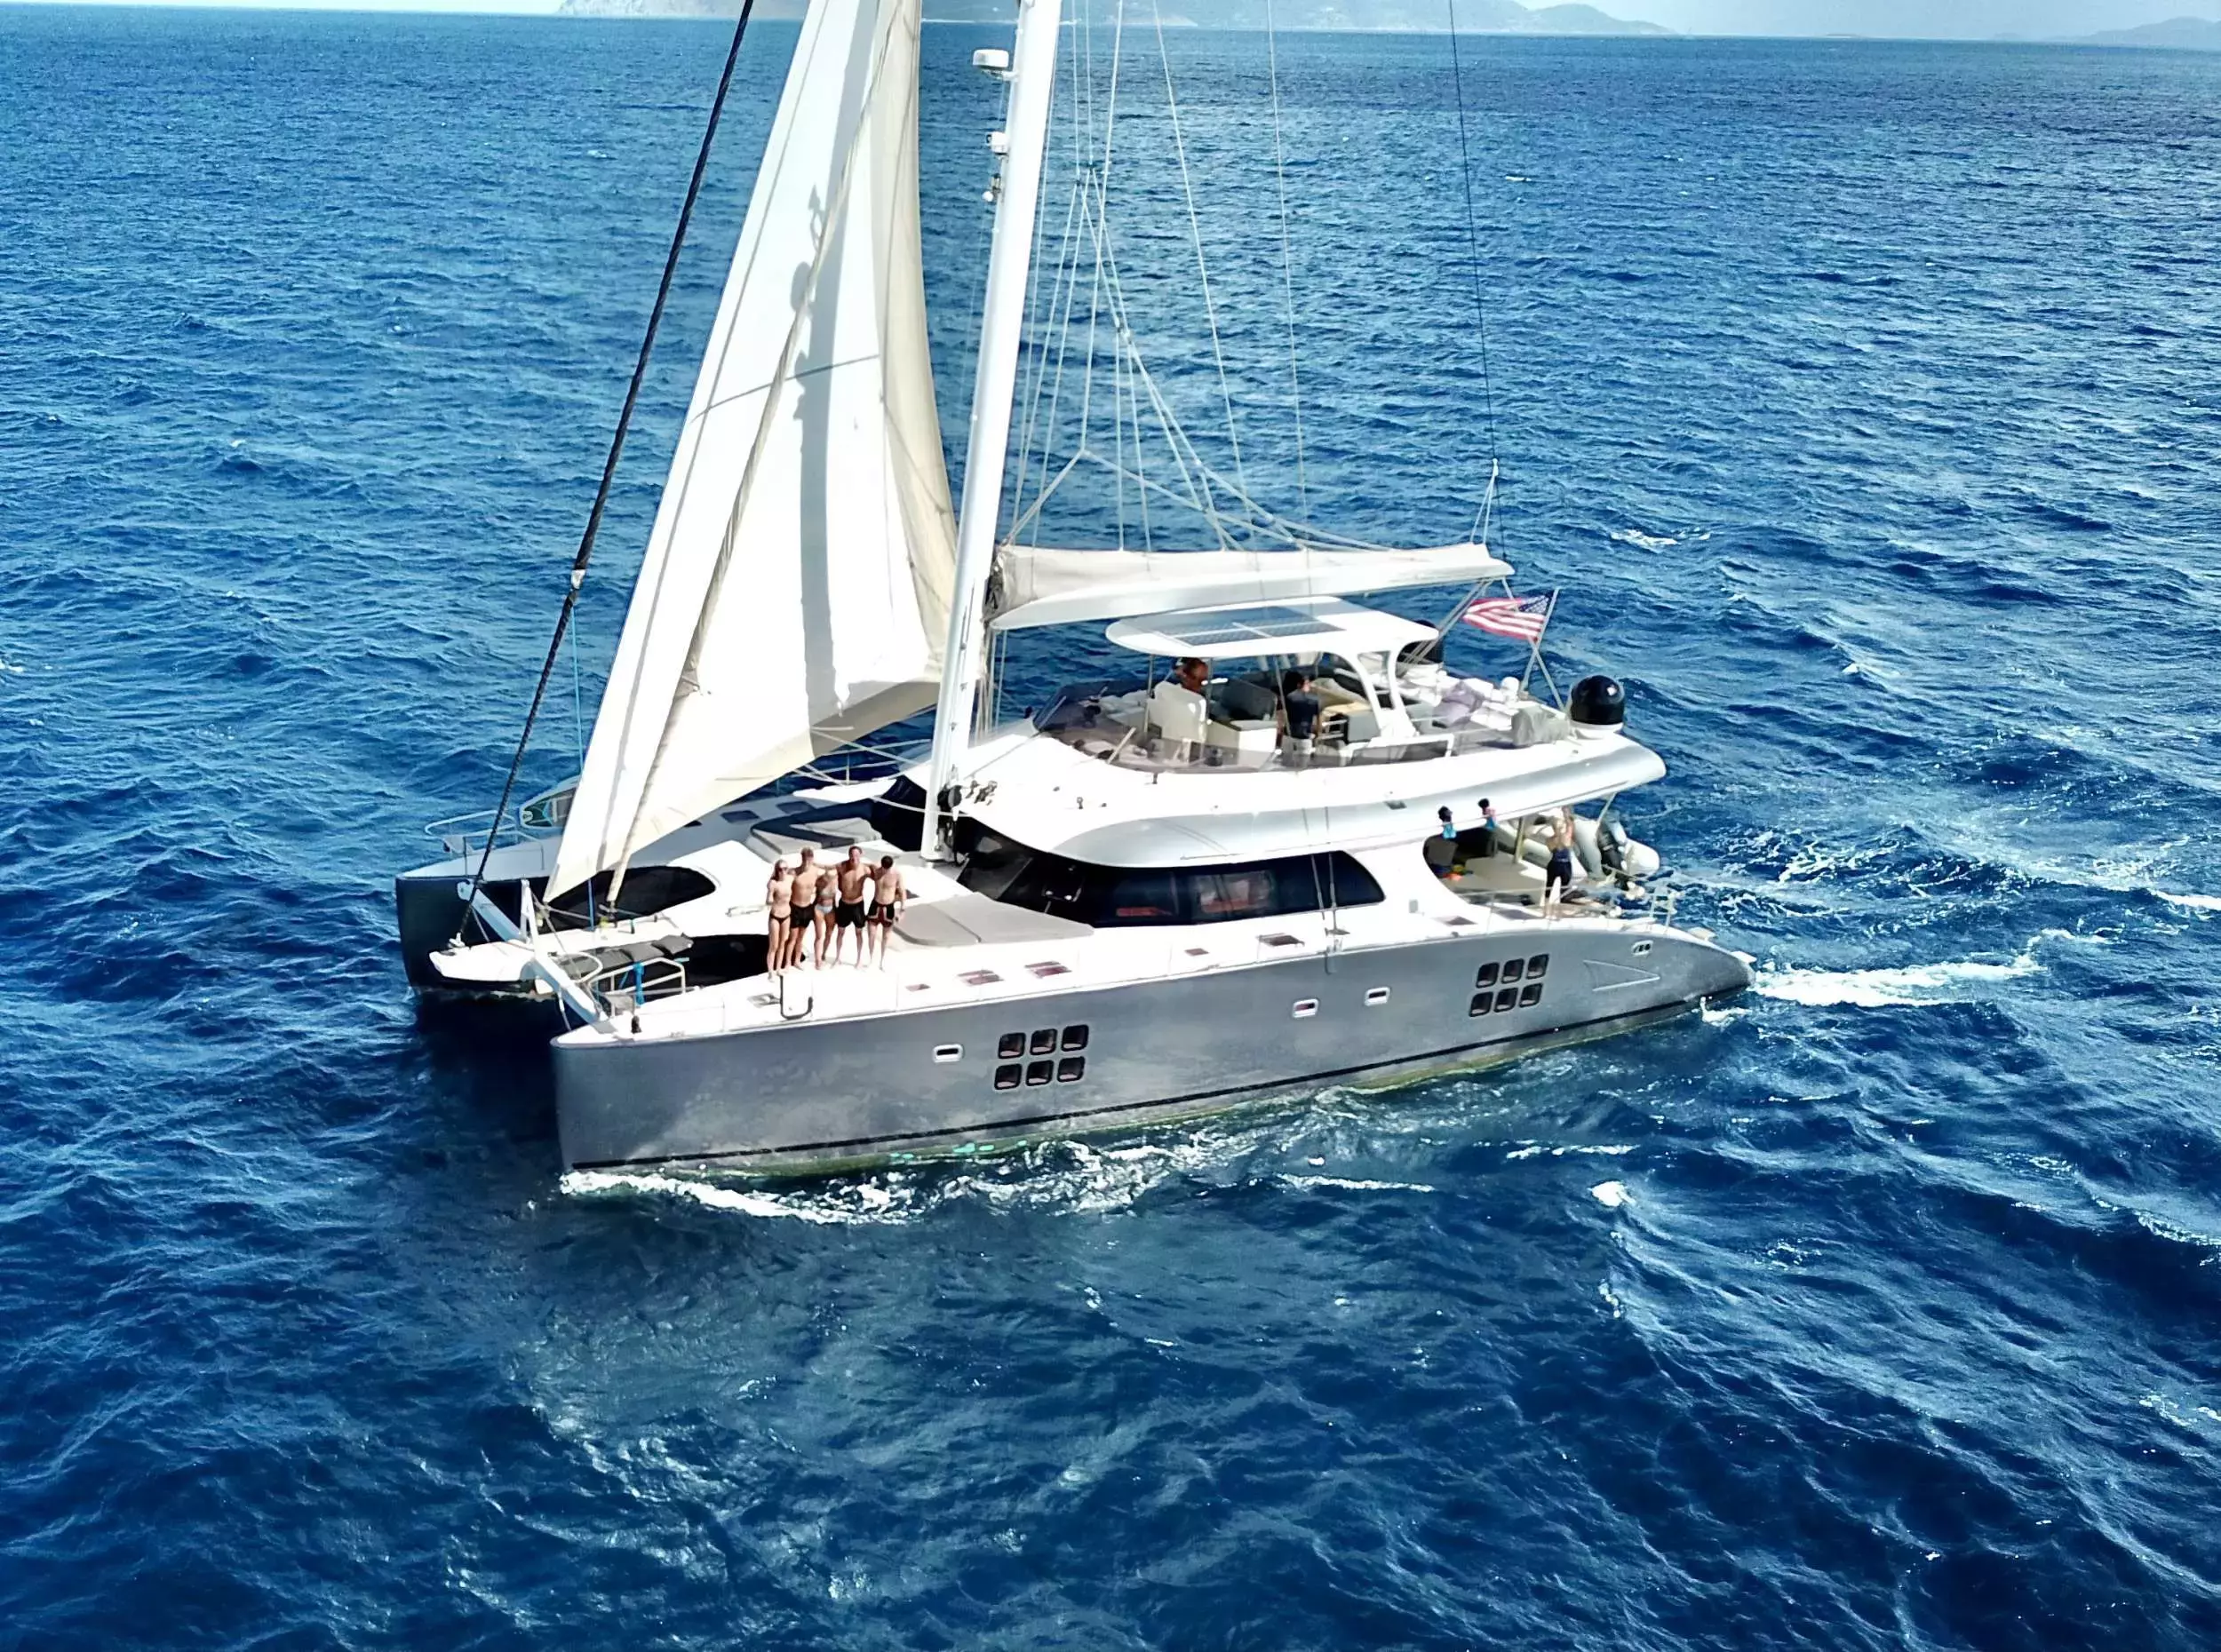 Excess by Sunreef Yachts - Special Offer for a private Luxury Catamaran Charter in St John with a crew